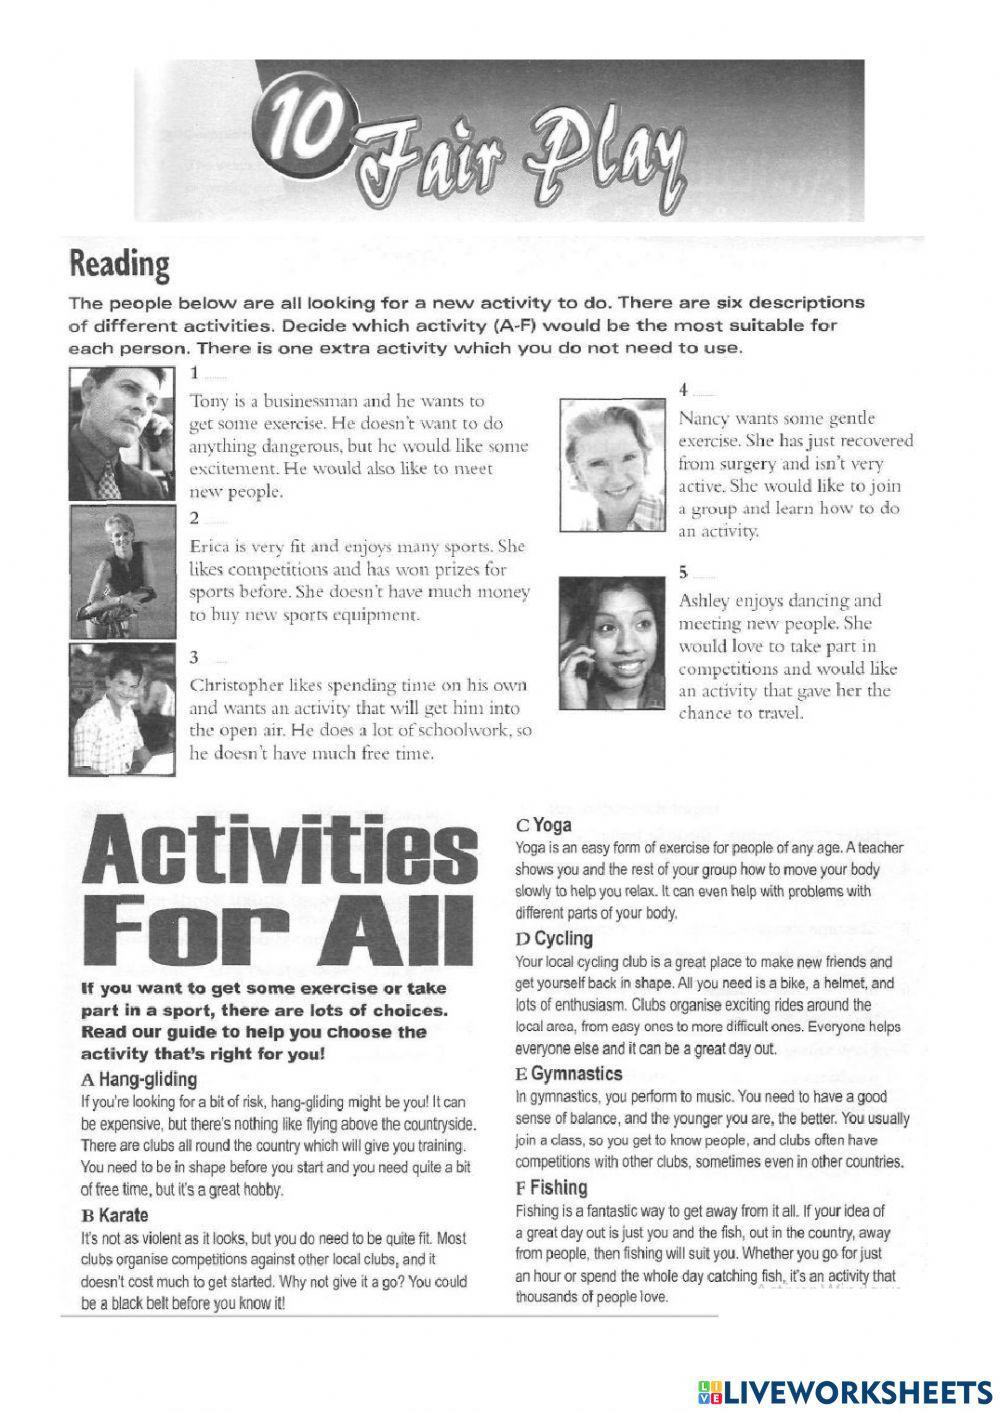 Reading: Activities for all